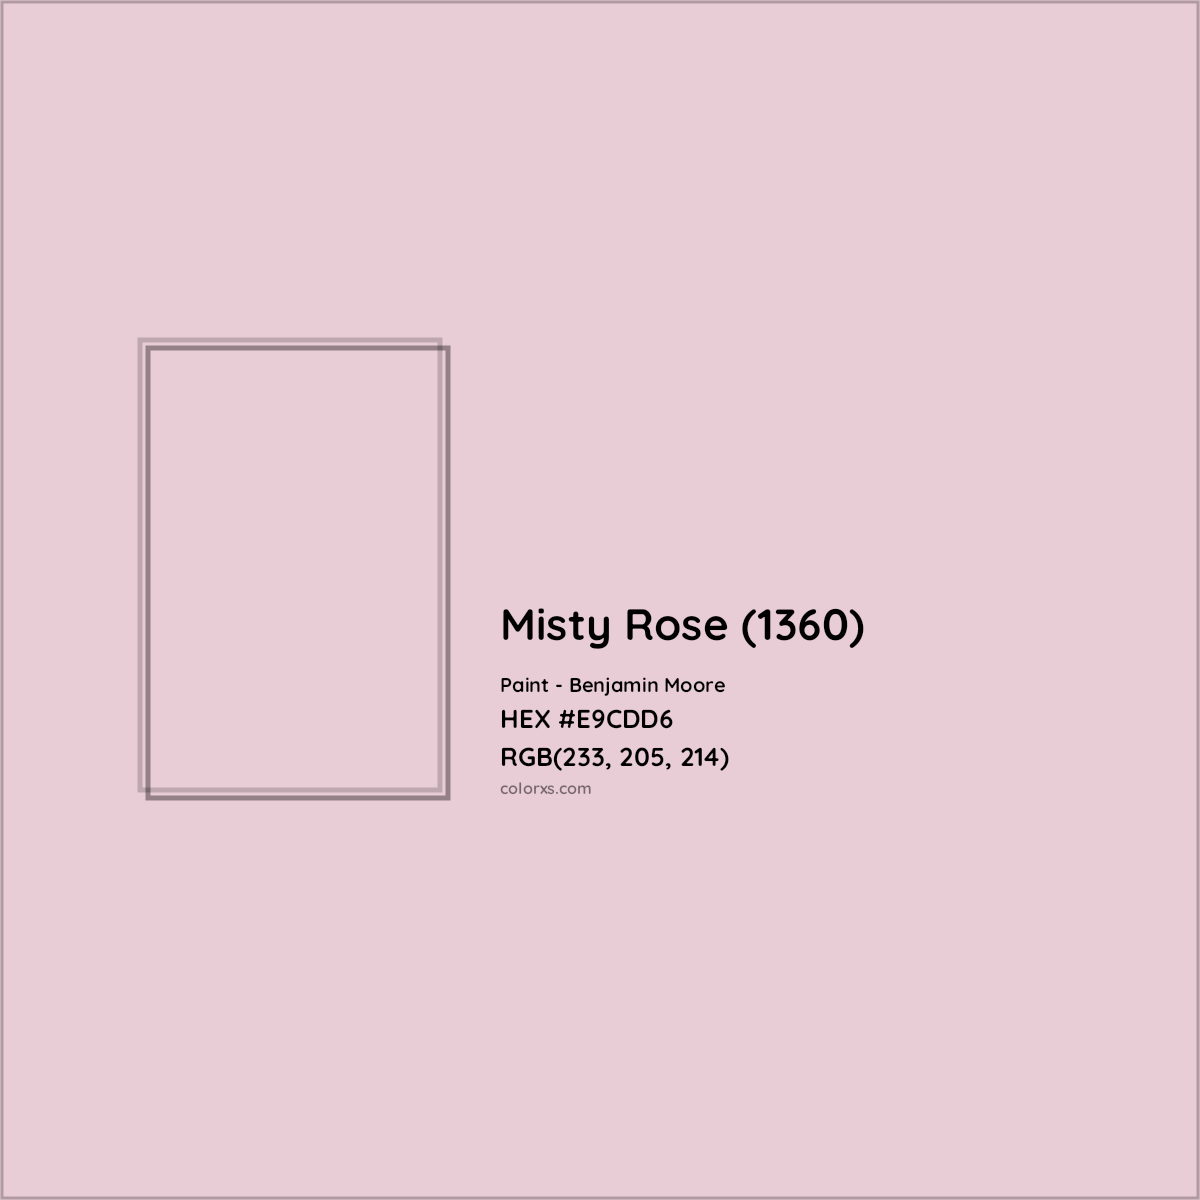 HEX #E9CDD6 Misty Rose (1360) Paint Benjamin Moore - Color Code